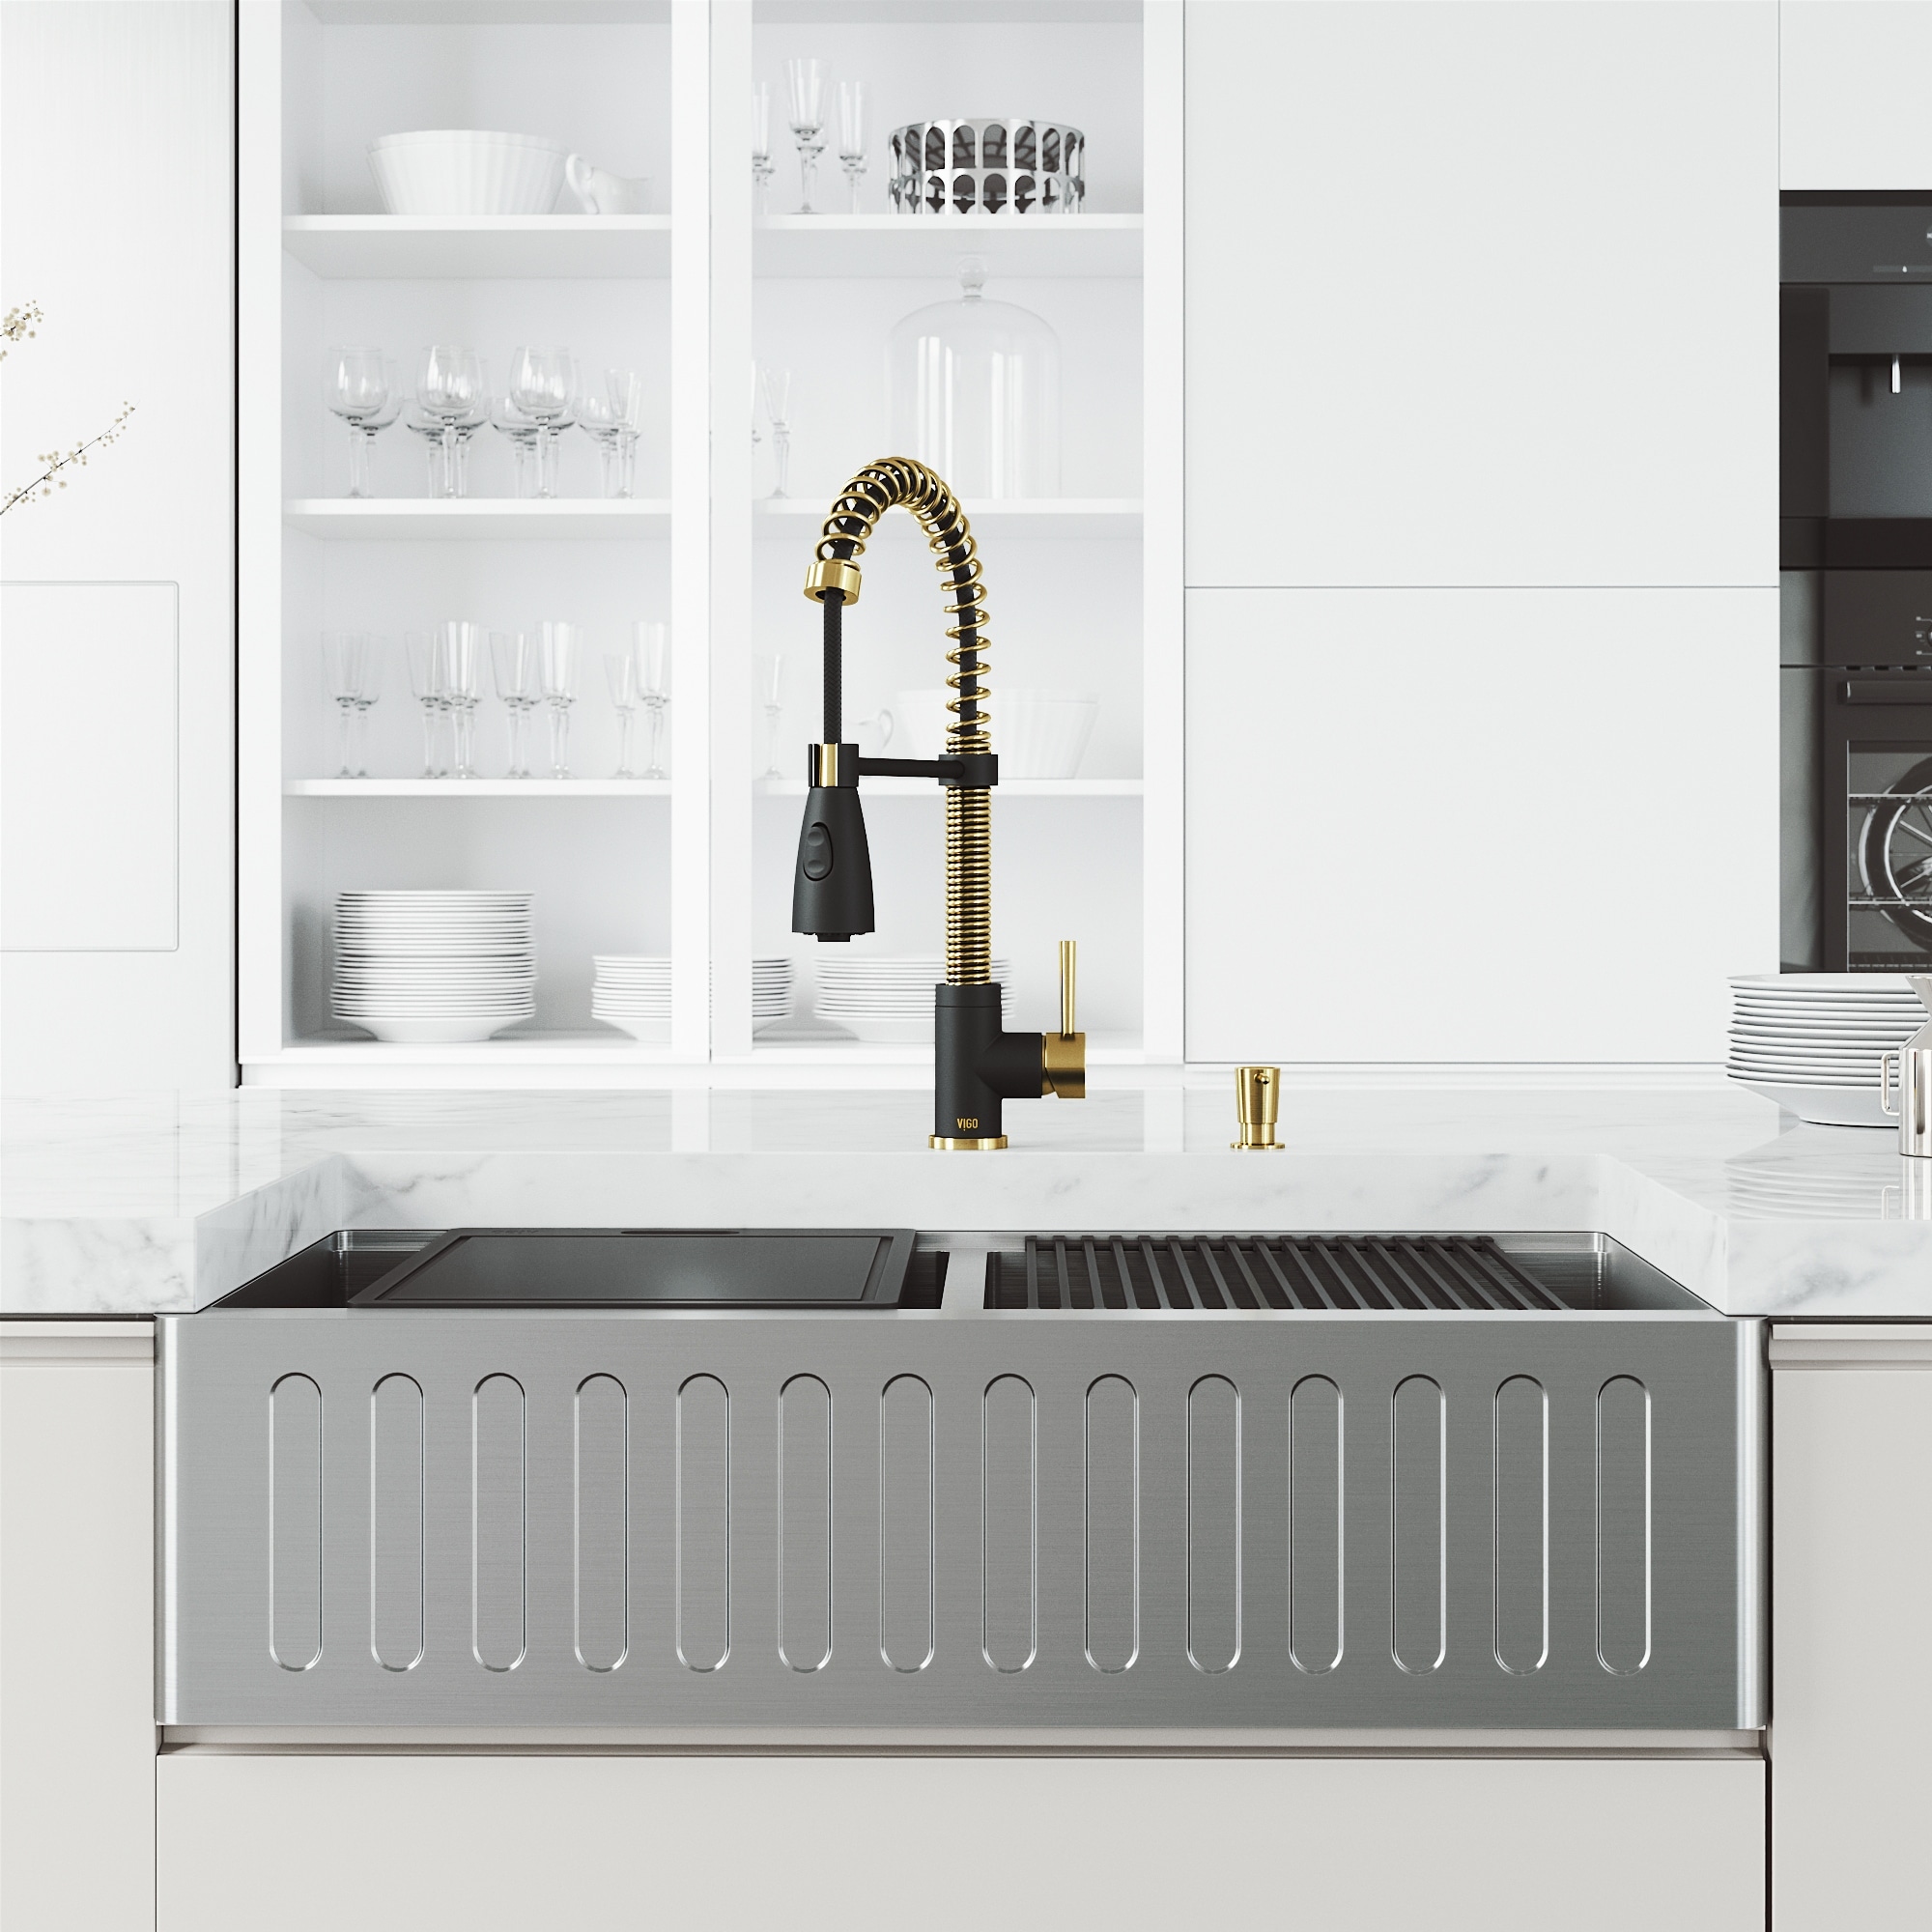 Vigo 36 In Apron Front Double Bowl Stainless Steel Farmhouse Kitchen Sink And Faucet In Matte Brushed Gold And Matte Black On Sale Overstock 31673854